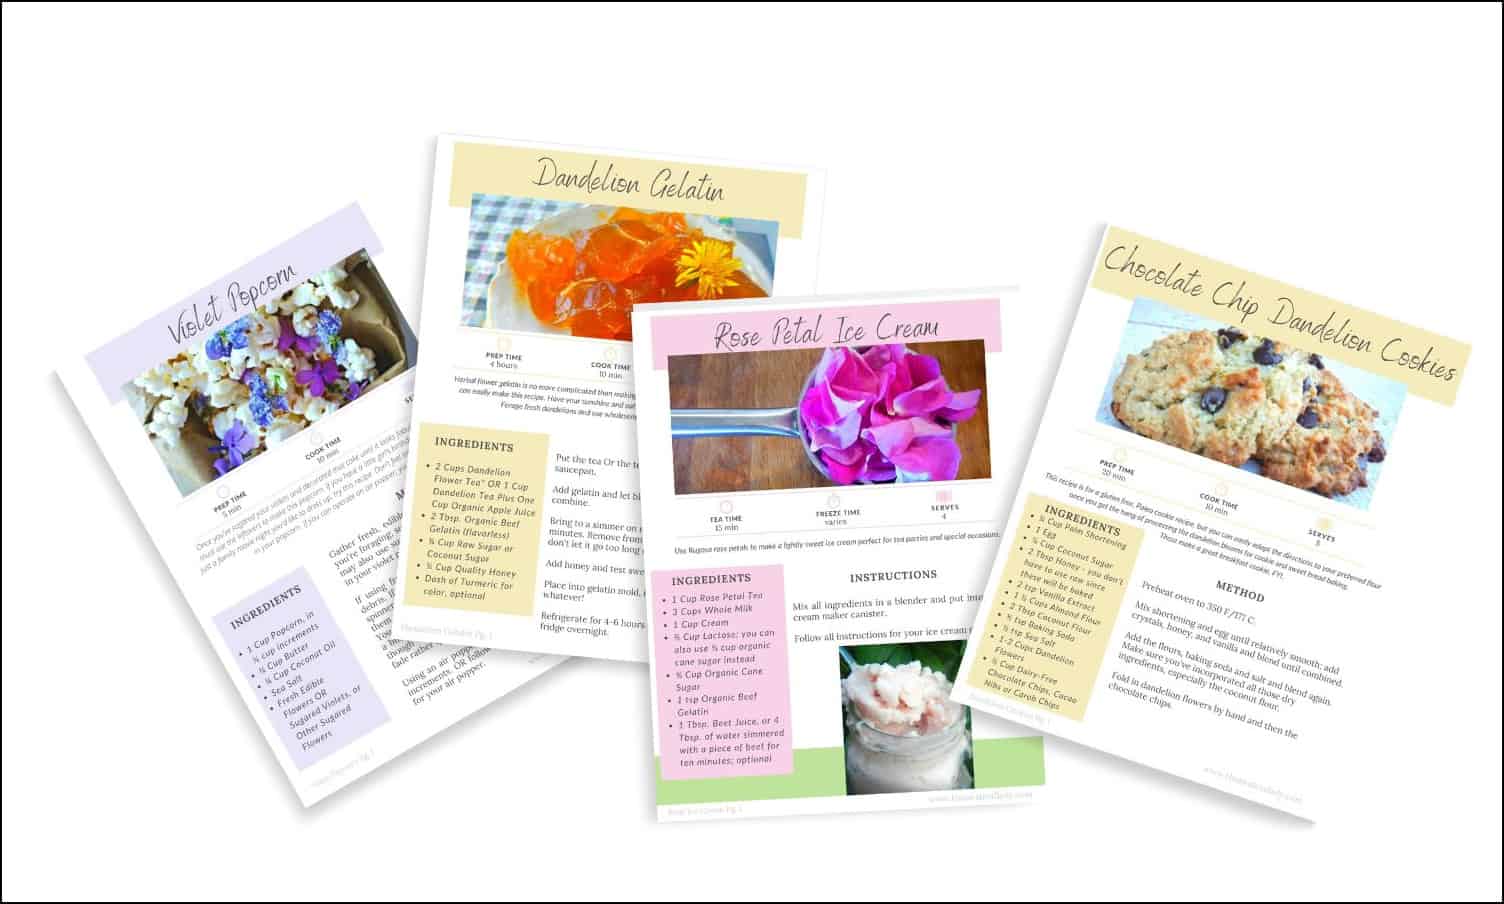 Herbal Flower Recipes sample pages, decorative